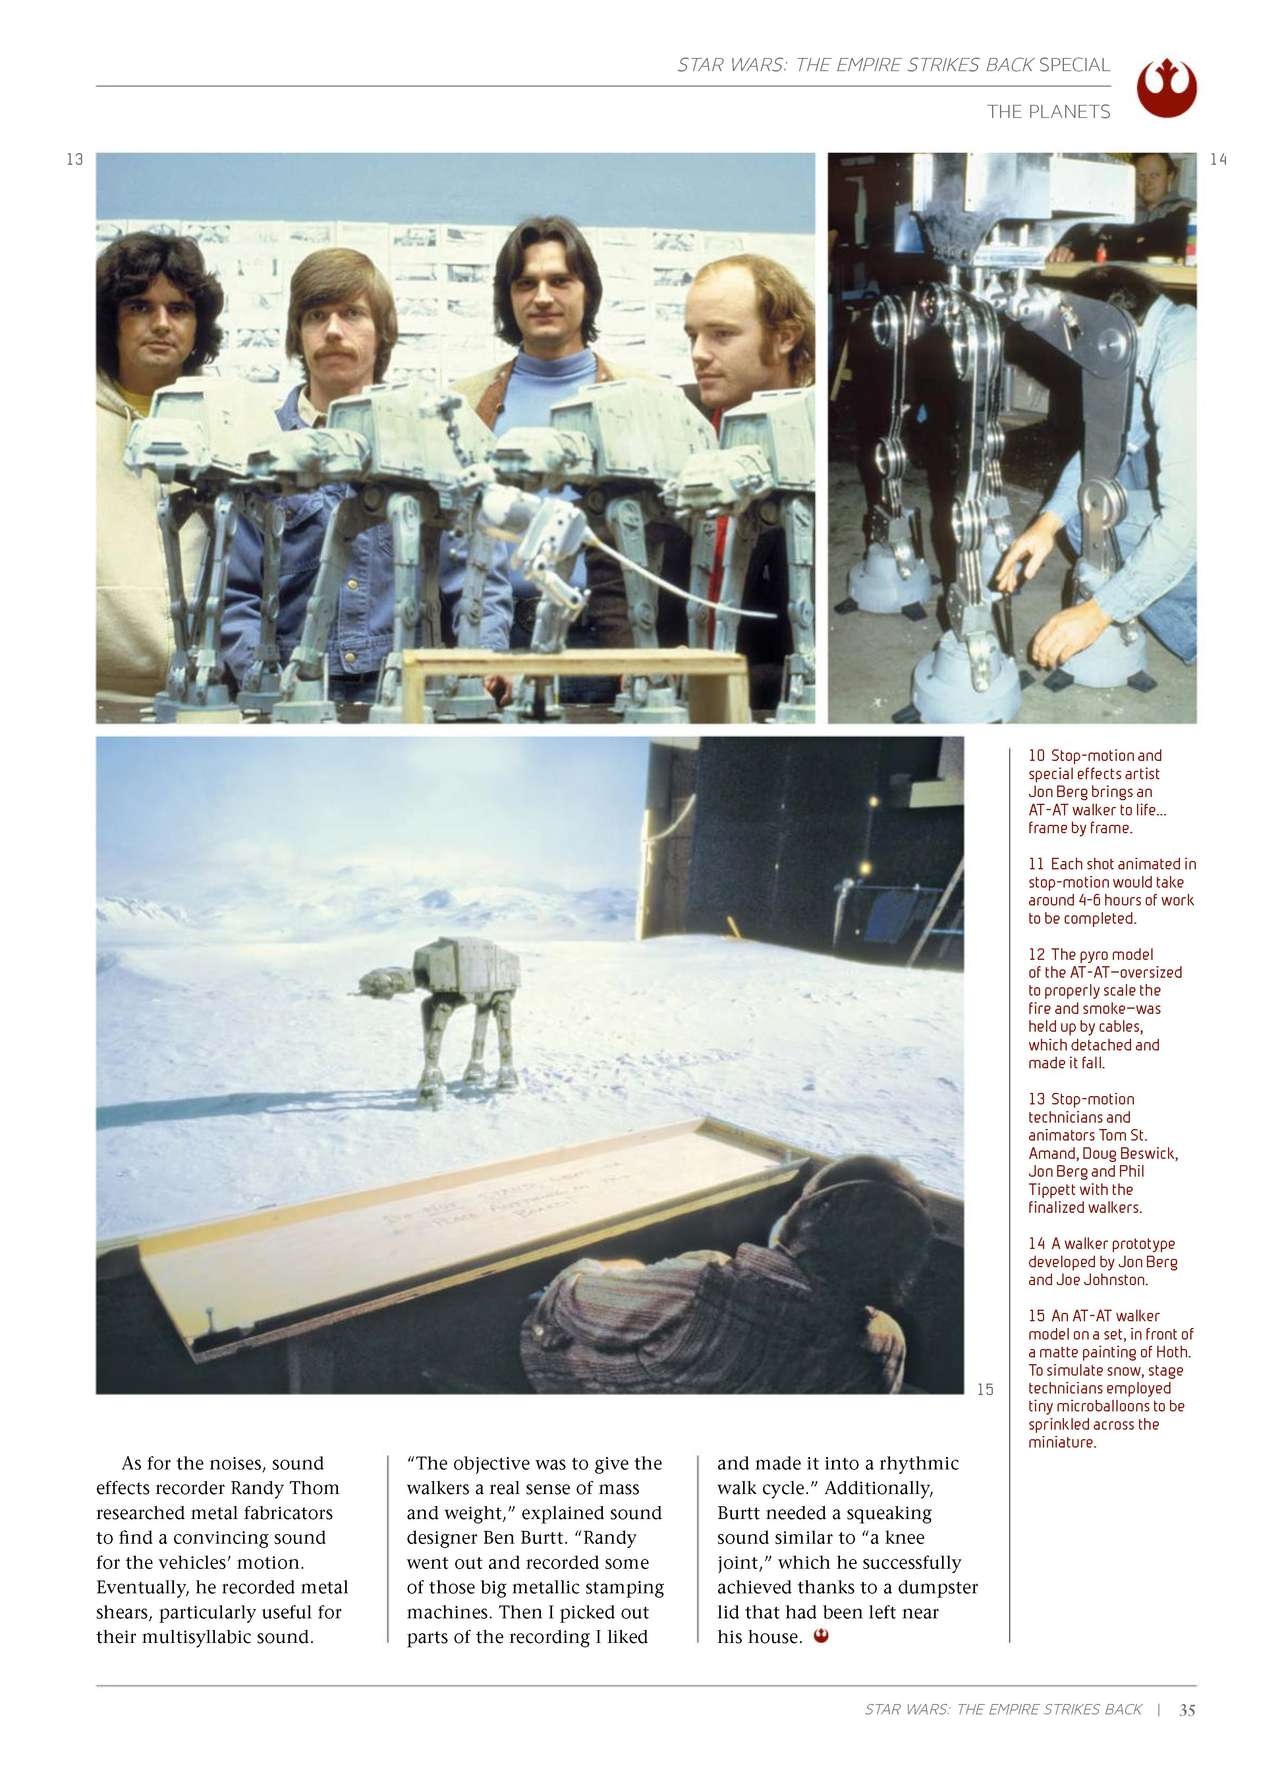 Star Wars - The Empire Strikes Back - The 40th Anniversary Special Edition 36